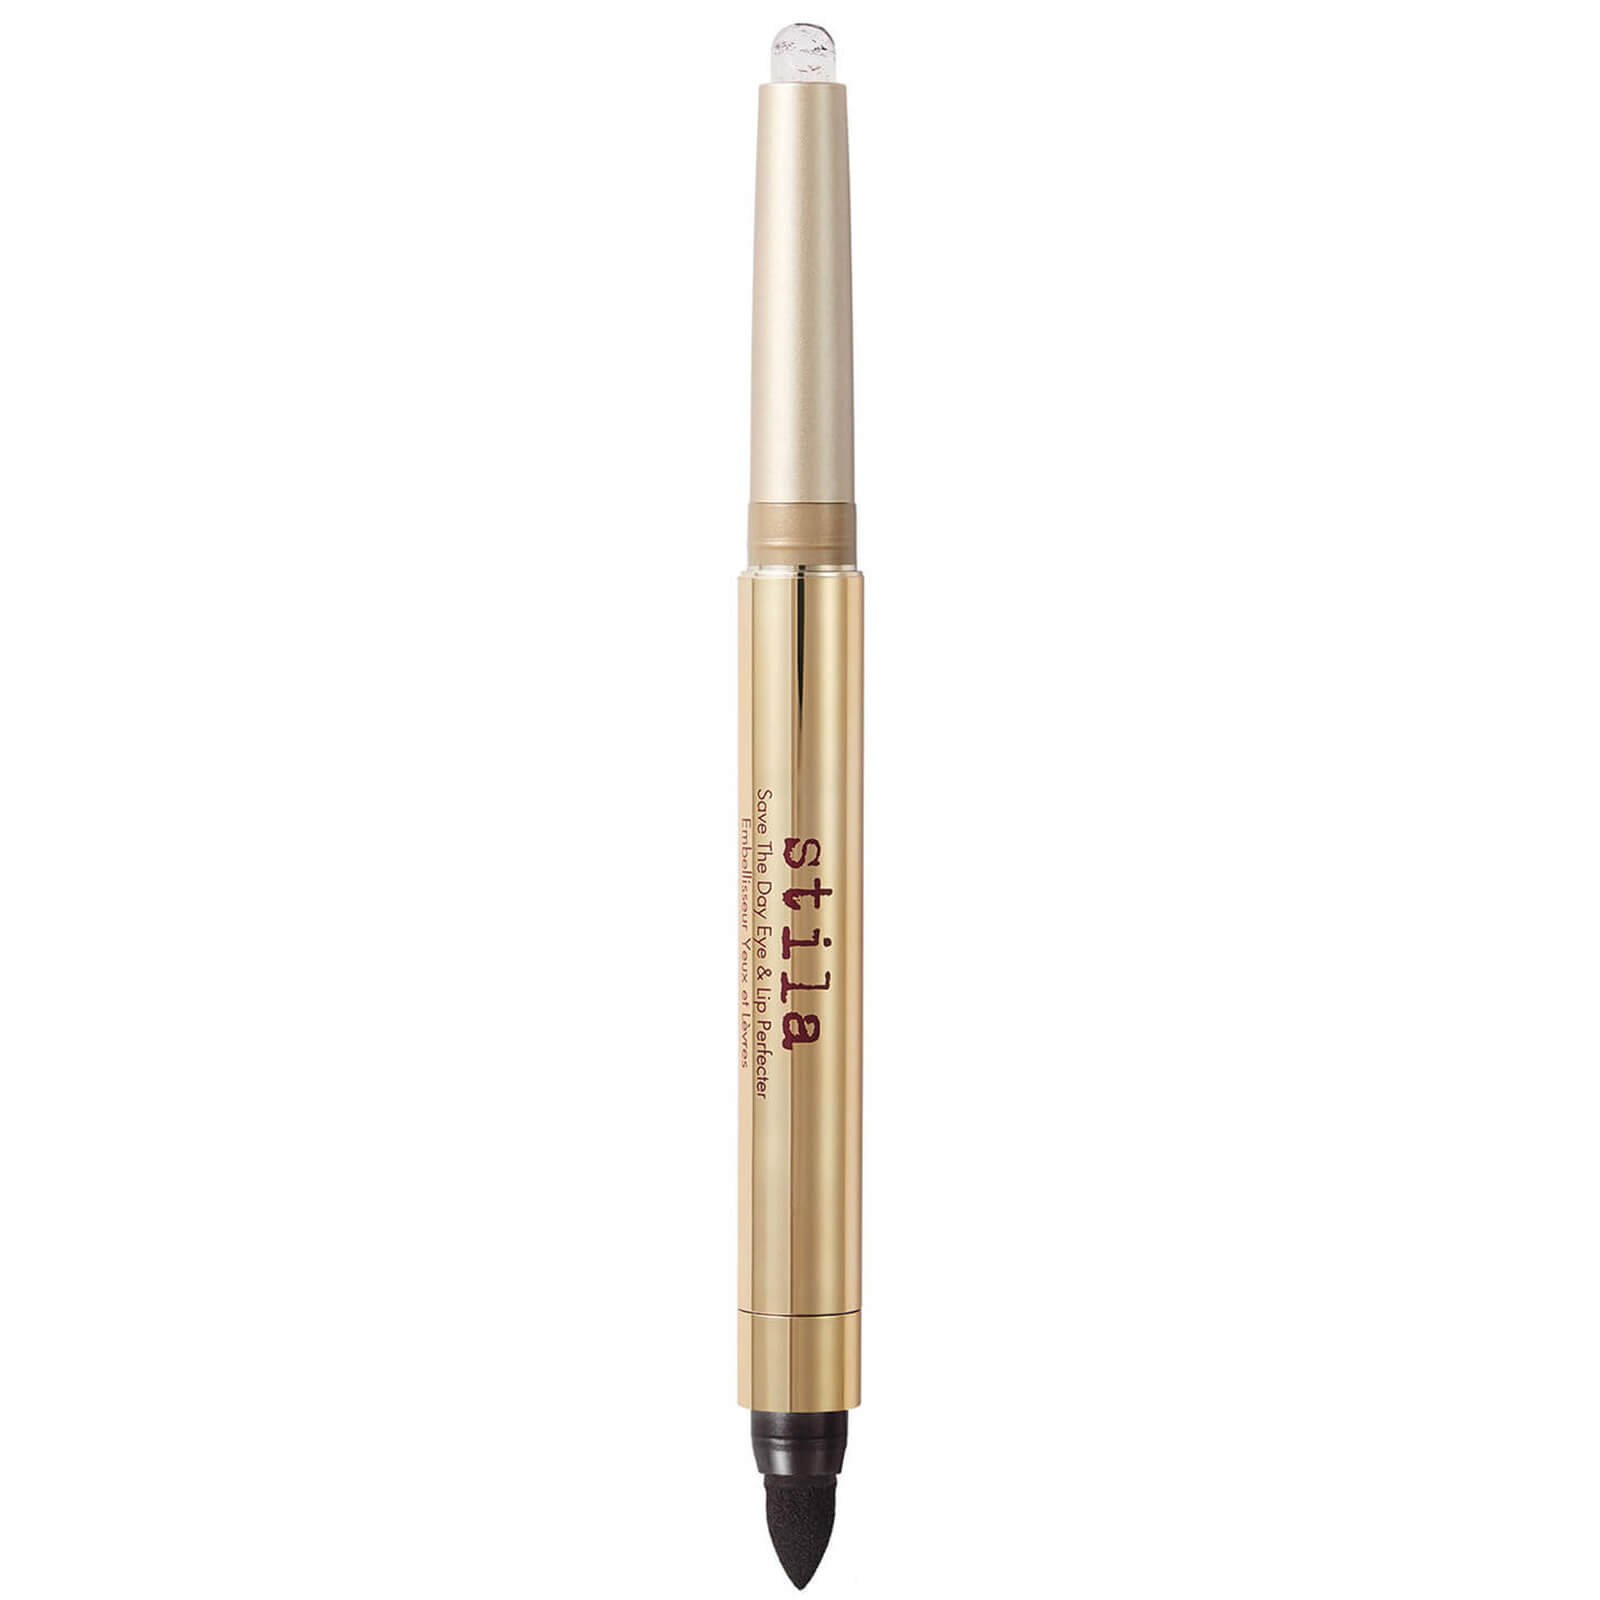 Image of Stila Save the Day Eye and Lip Perfecter 1.23g